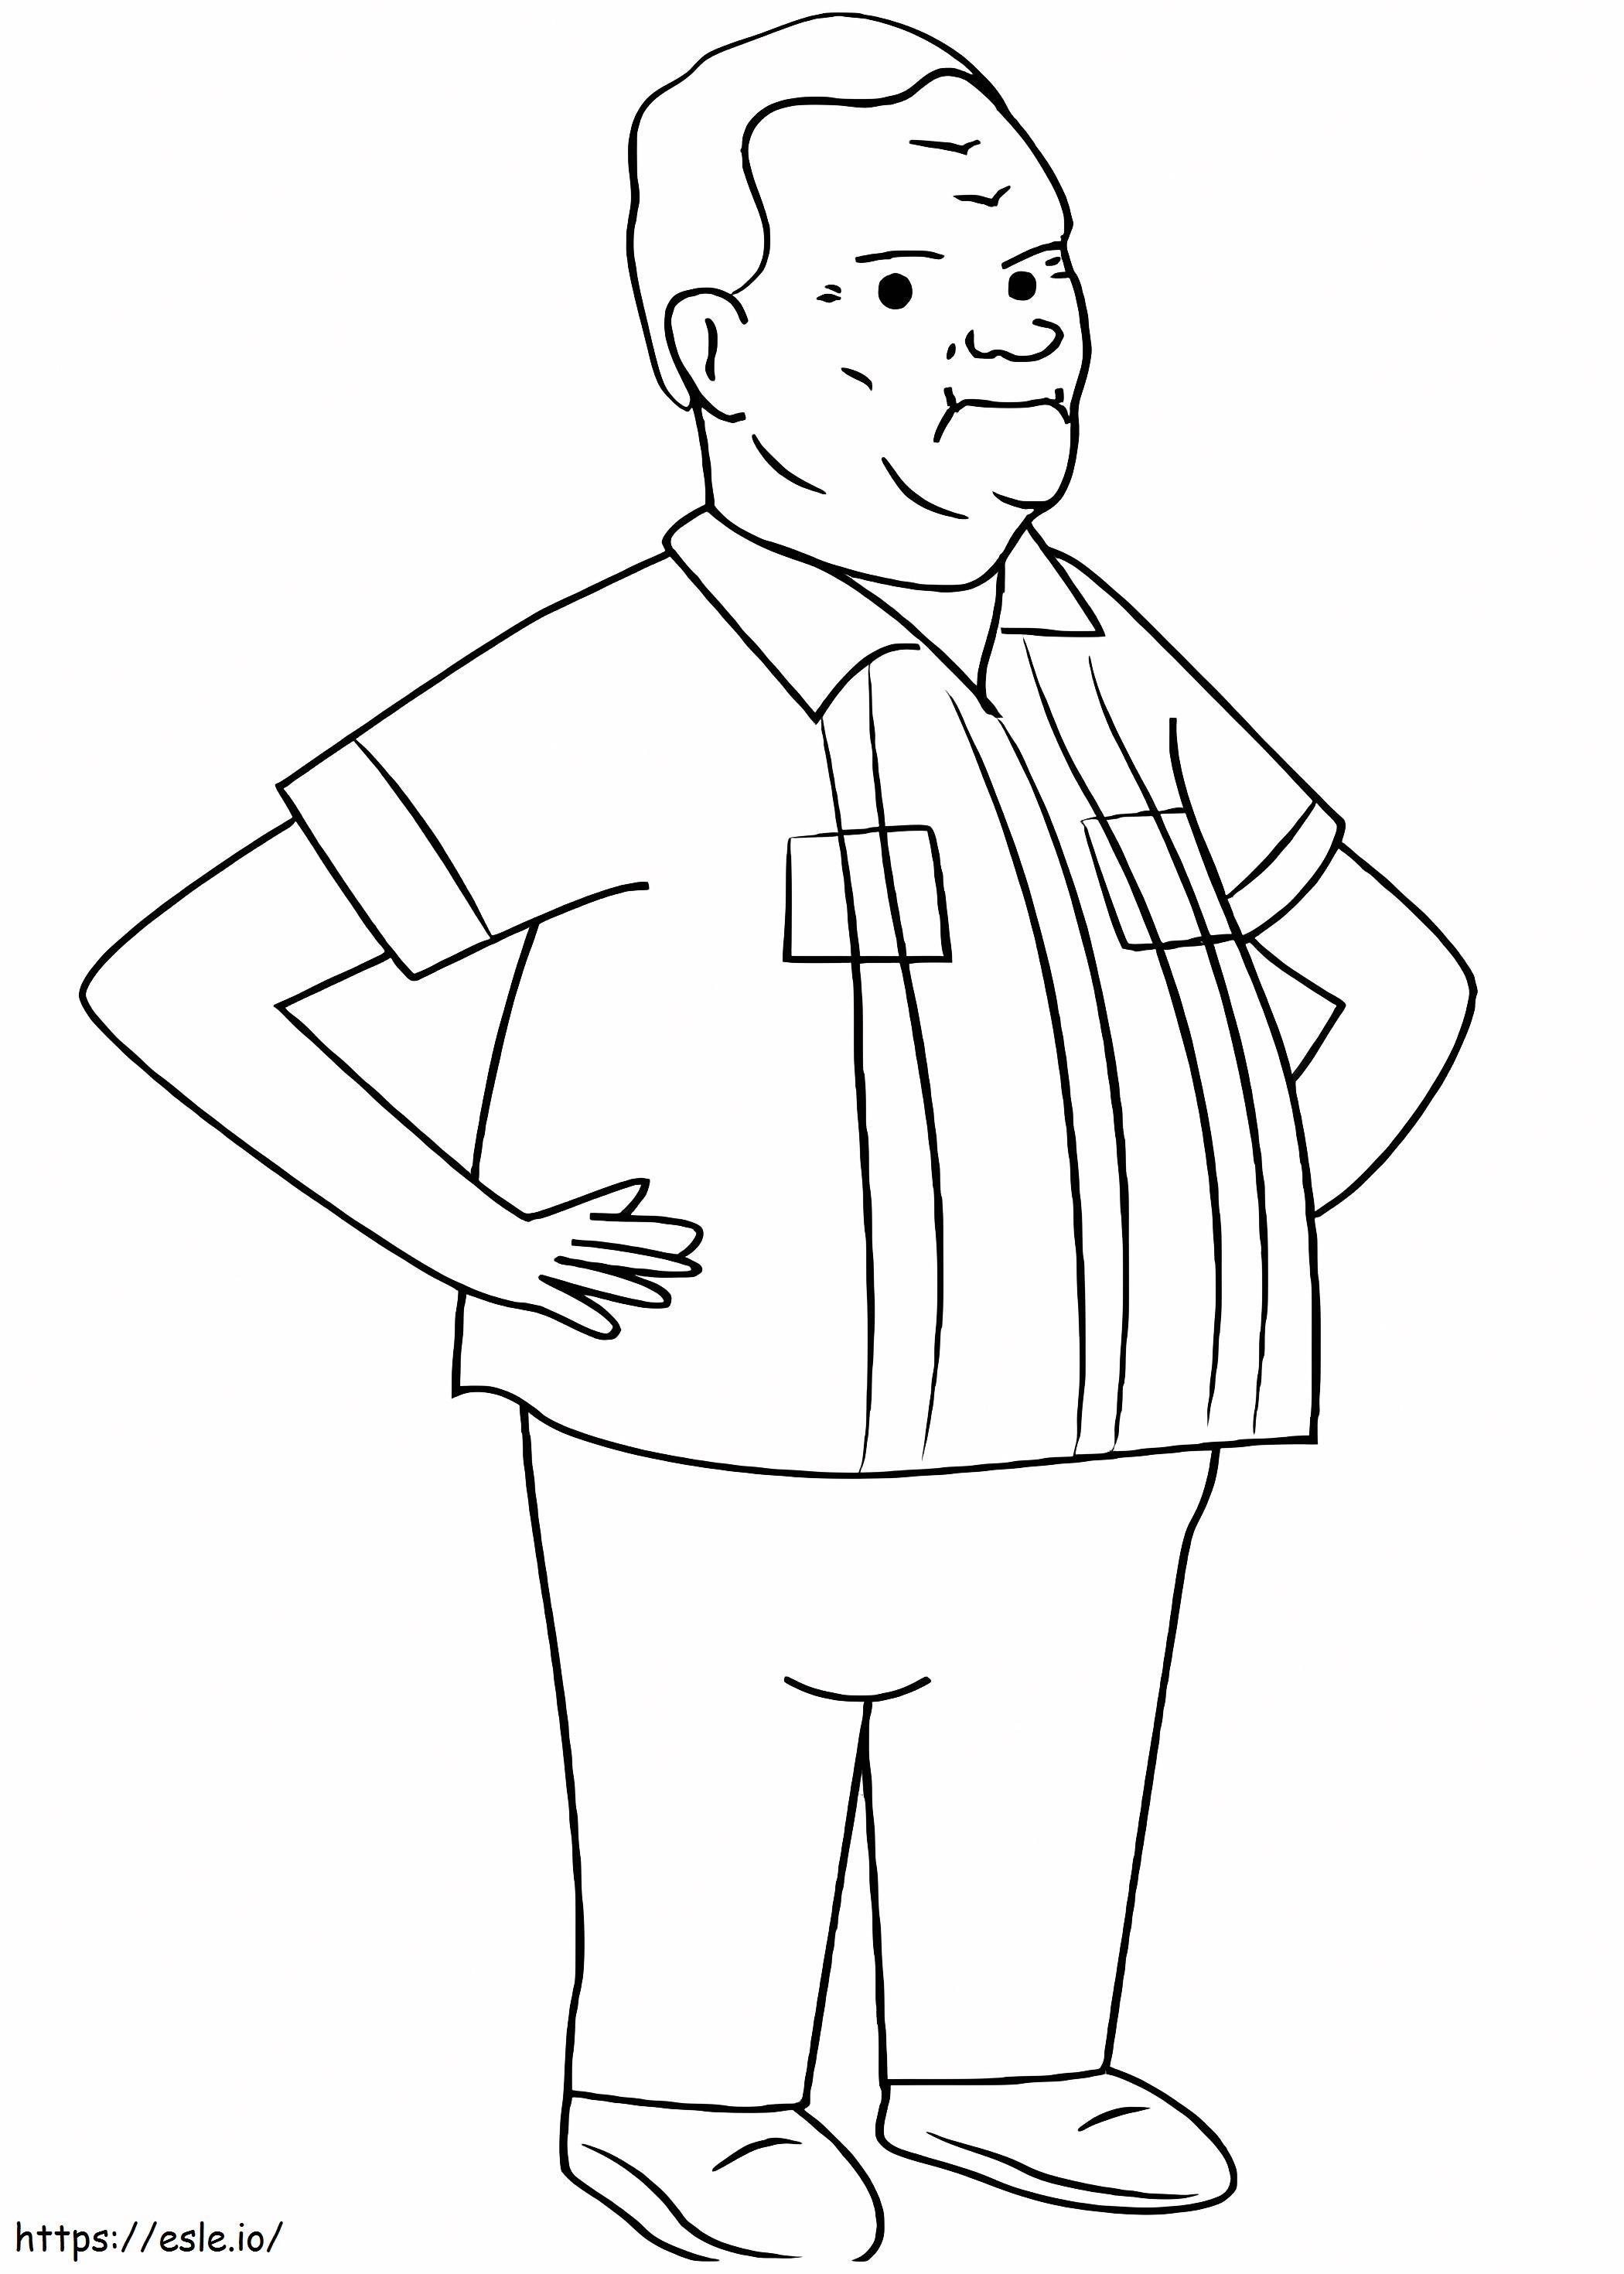 Cotton Hill From King Of The Hill coloring page